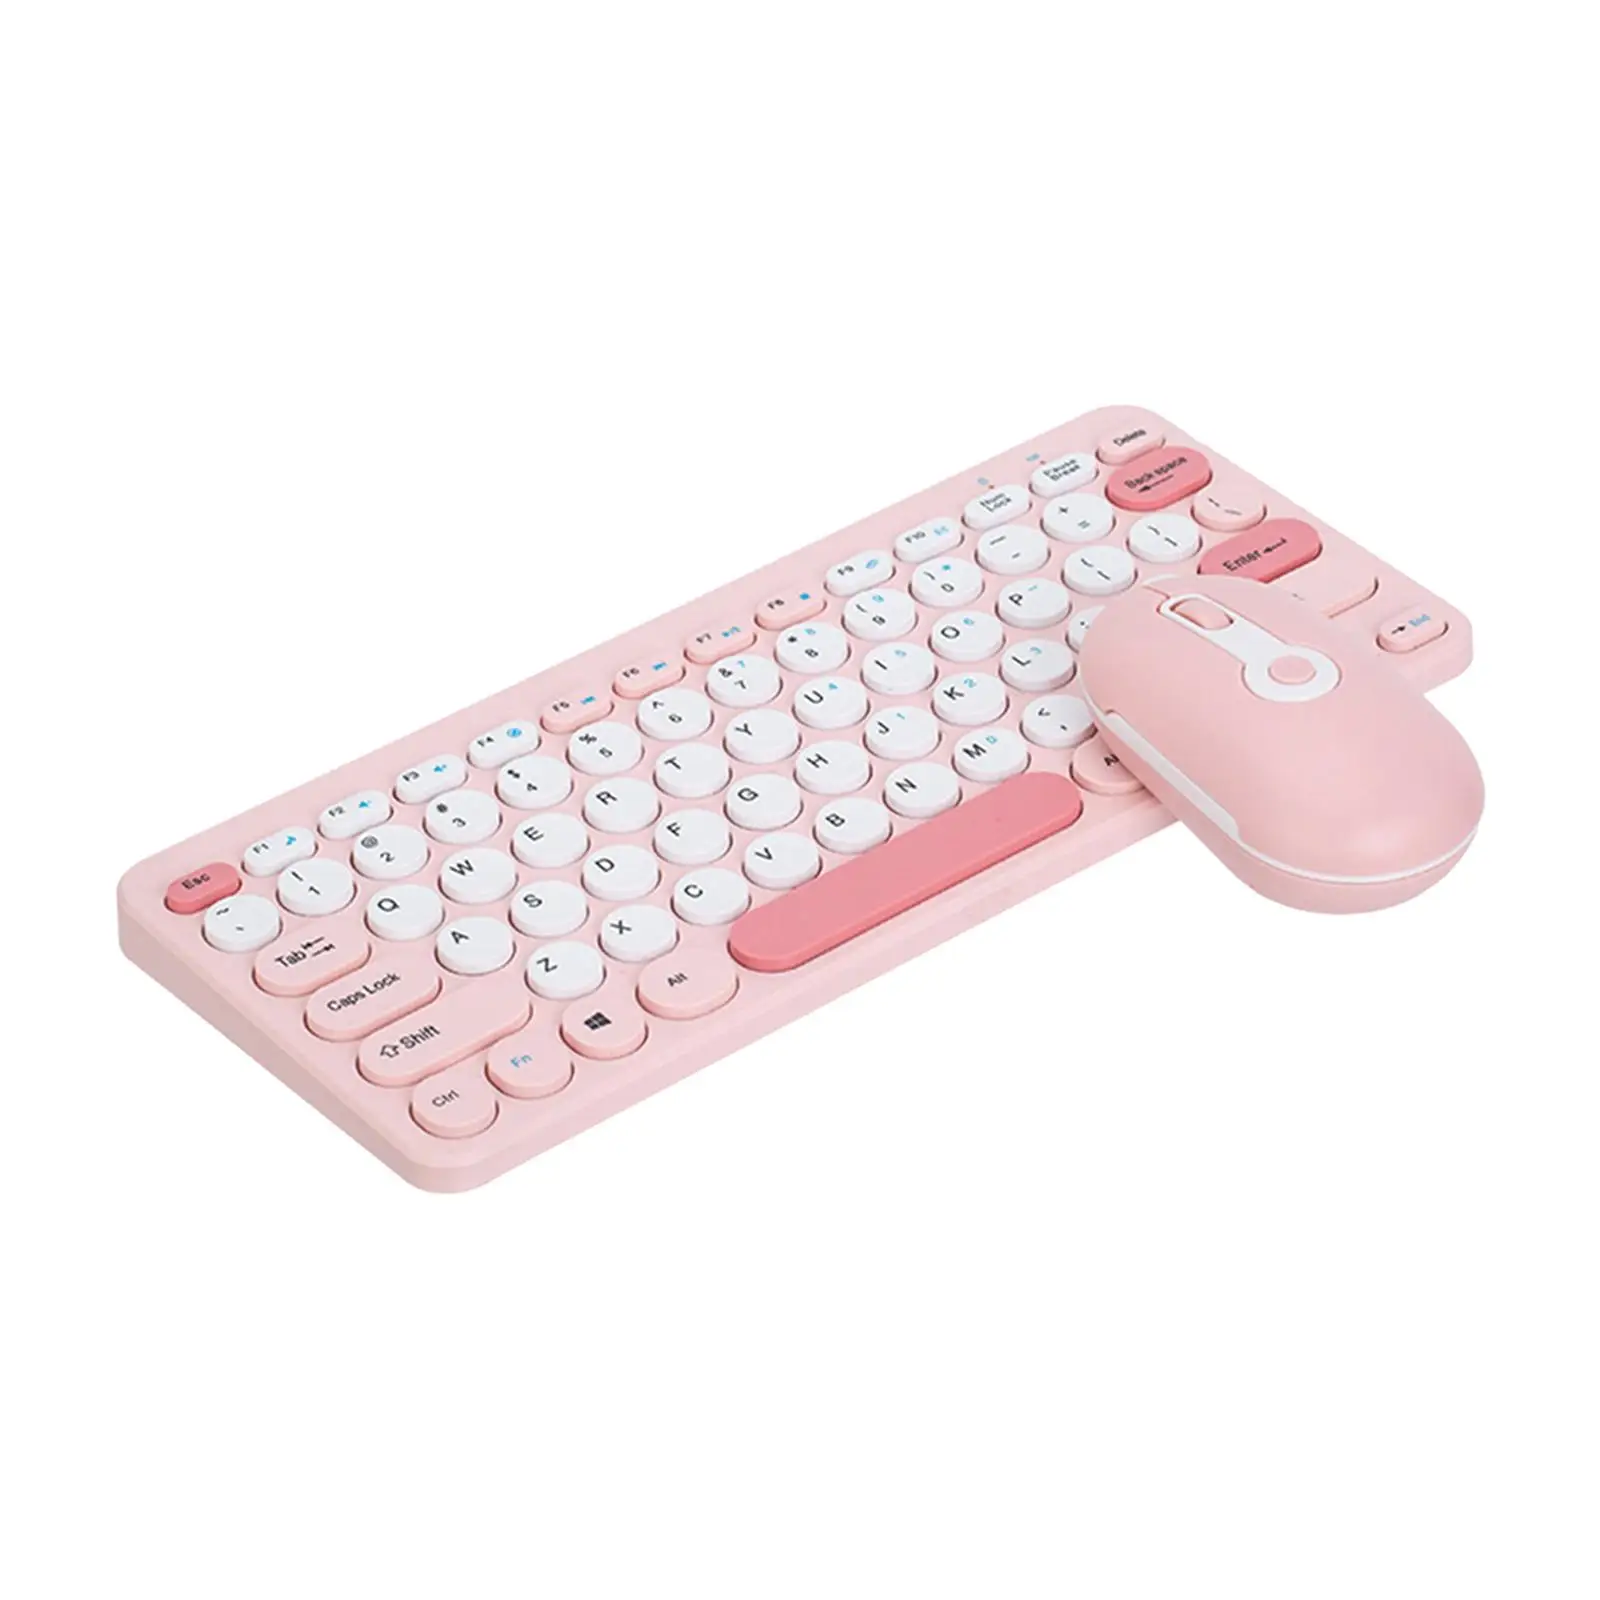 Wireless Computer Keyboard Mouse Cordless USB Keyboard and Mouse and Quiet Click for PC Computer Desktop Android Tv Laptop